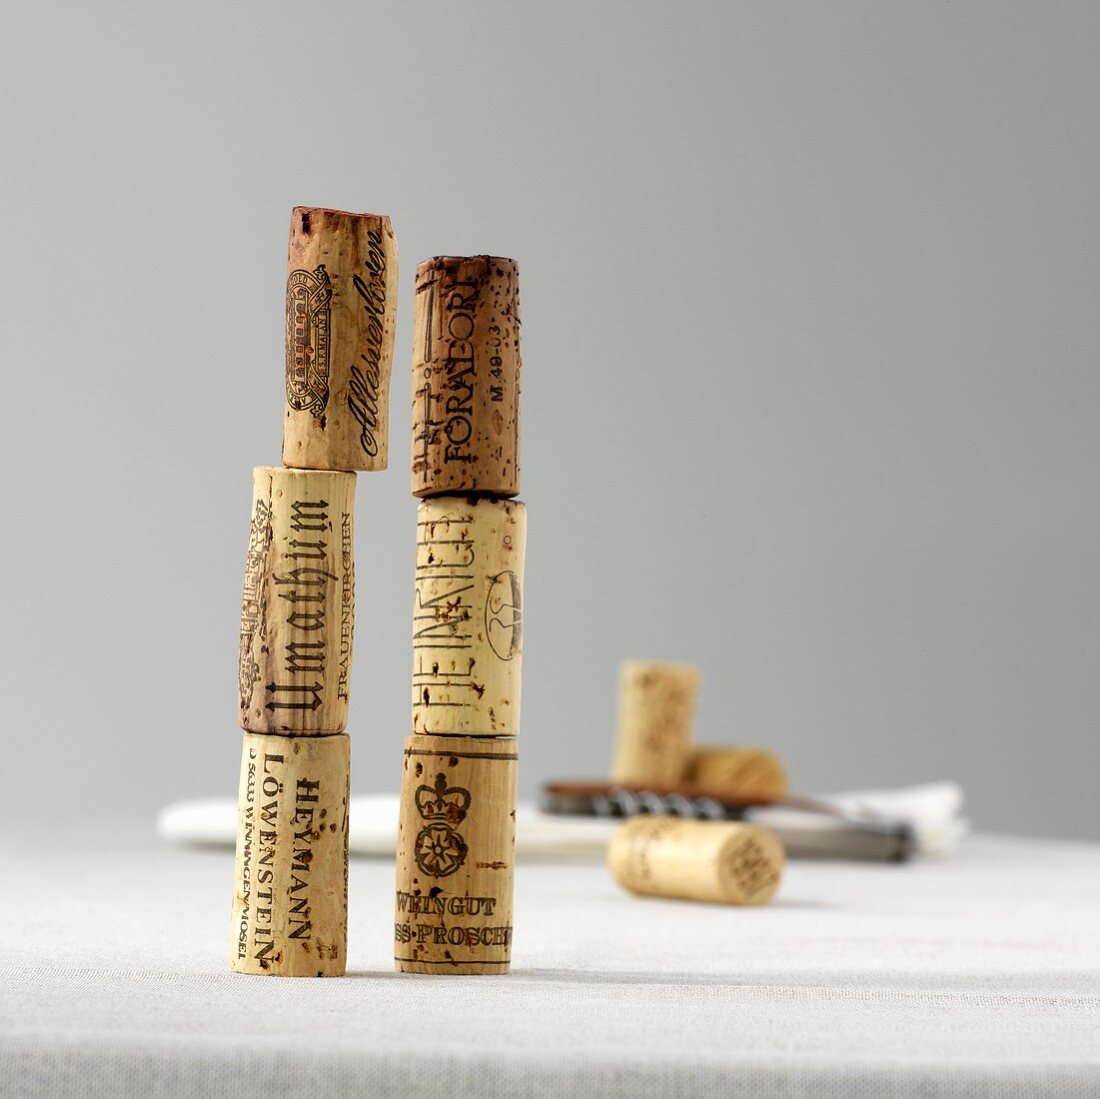 A stack of wine corks